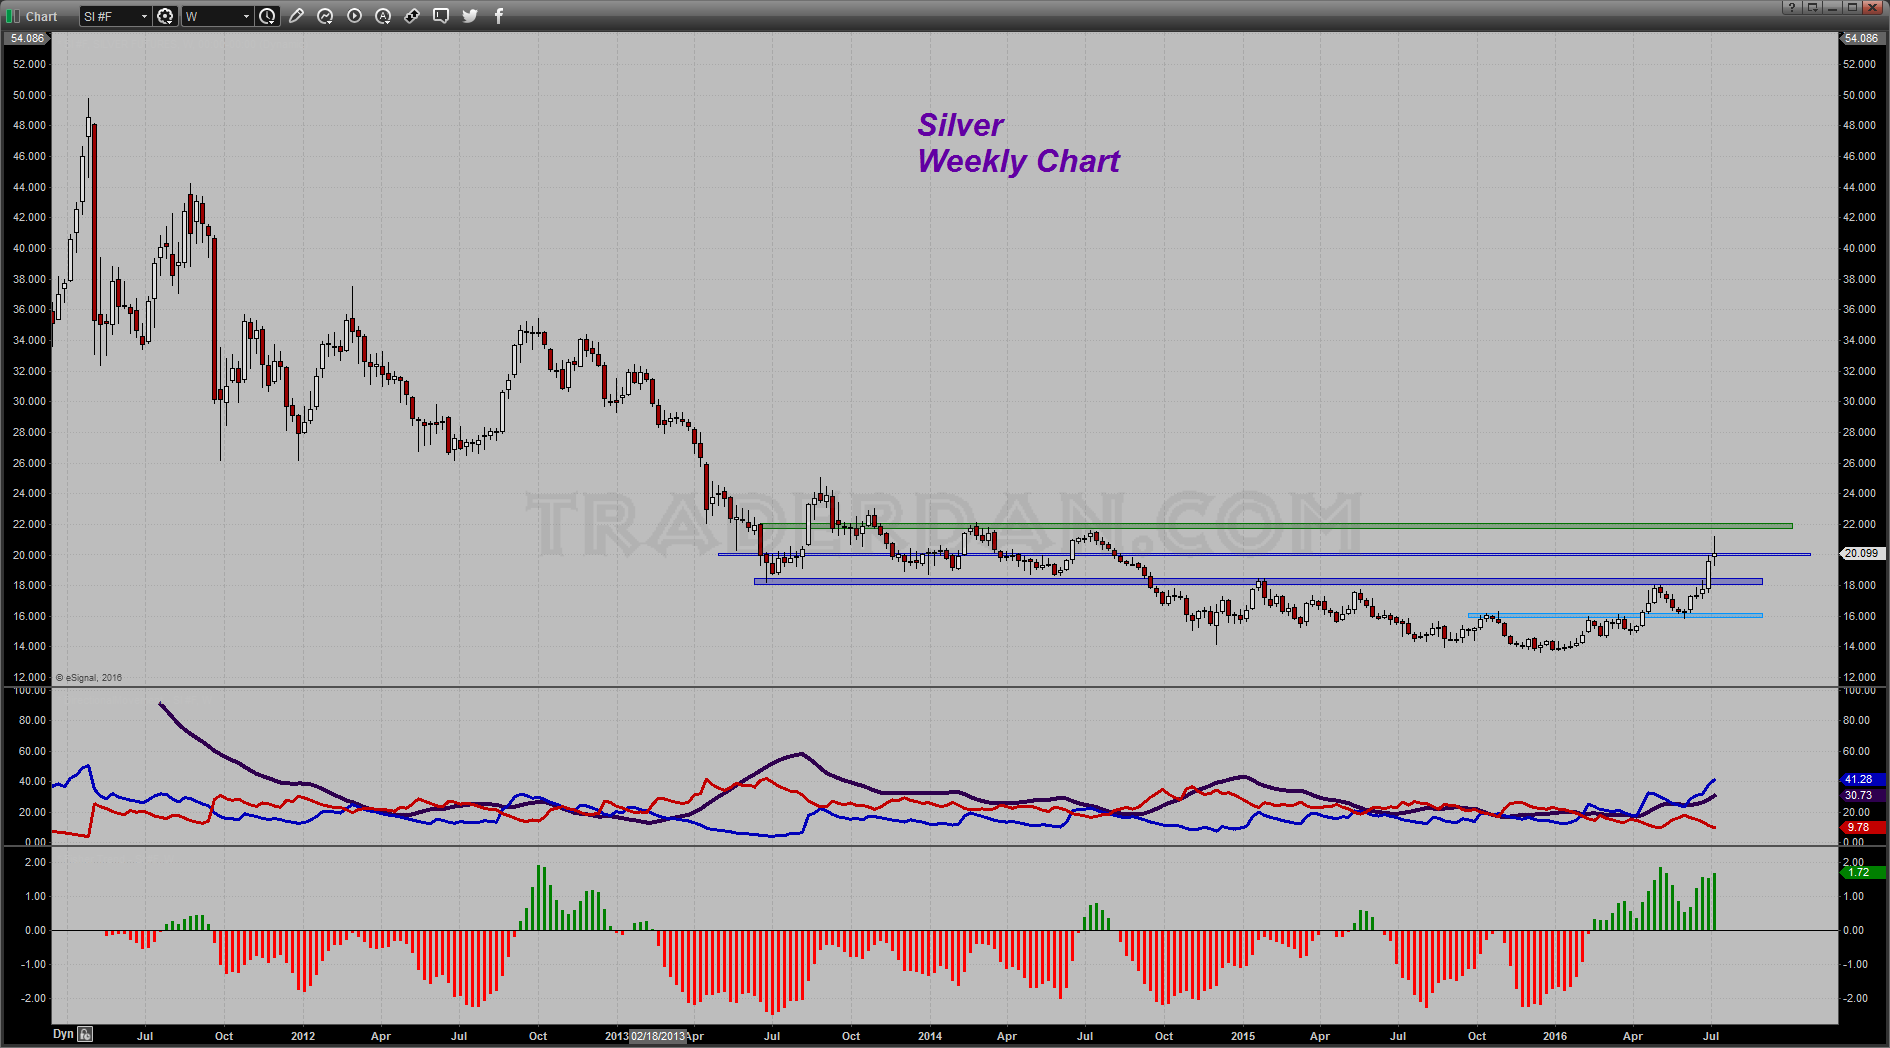 Silver Weekly with Downside Support